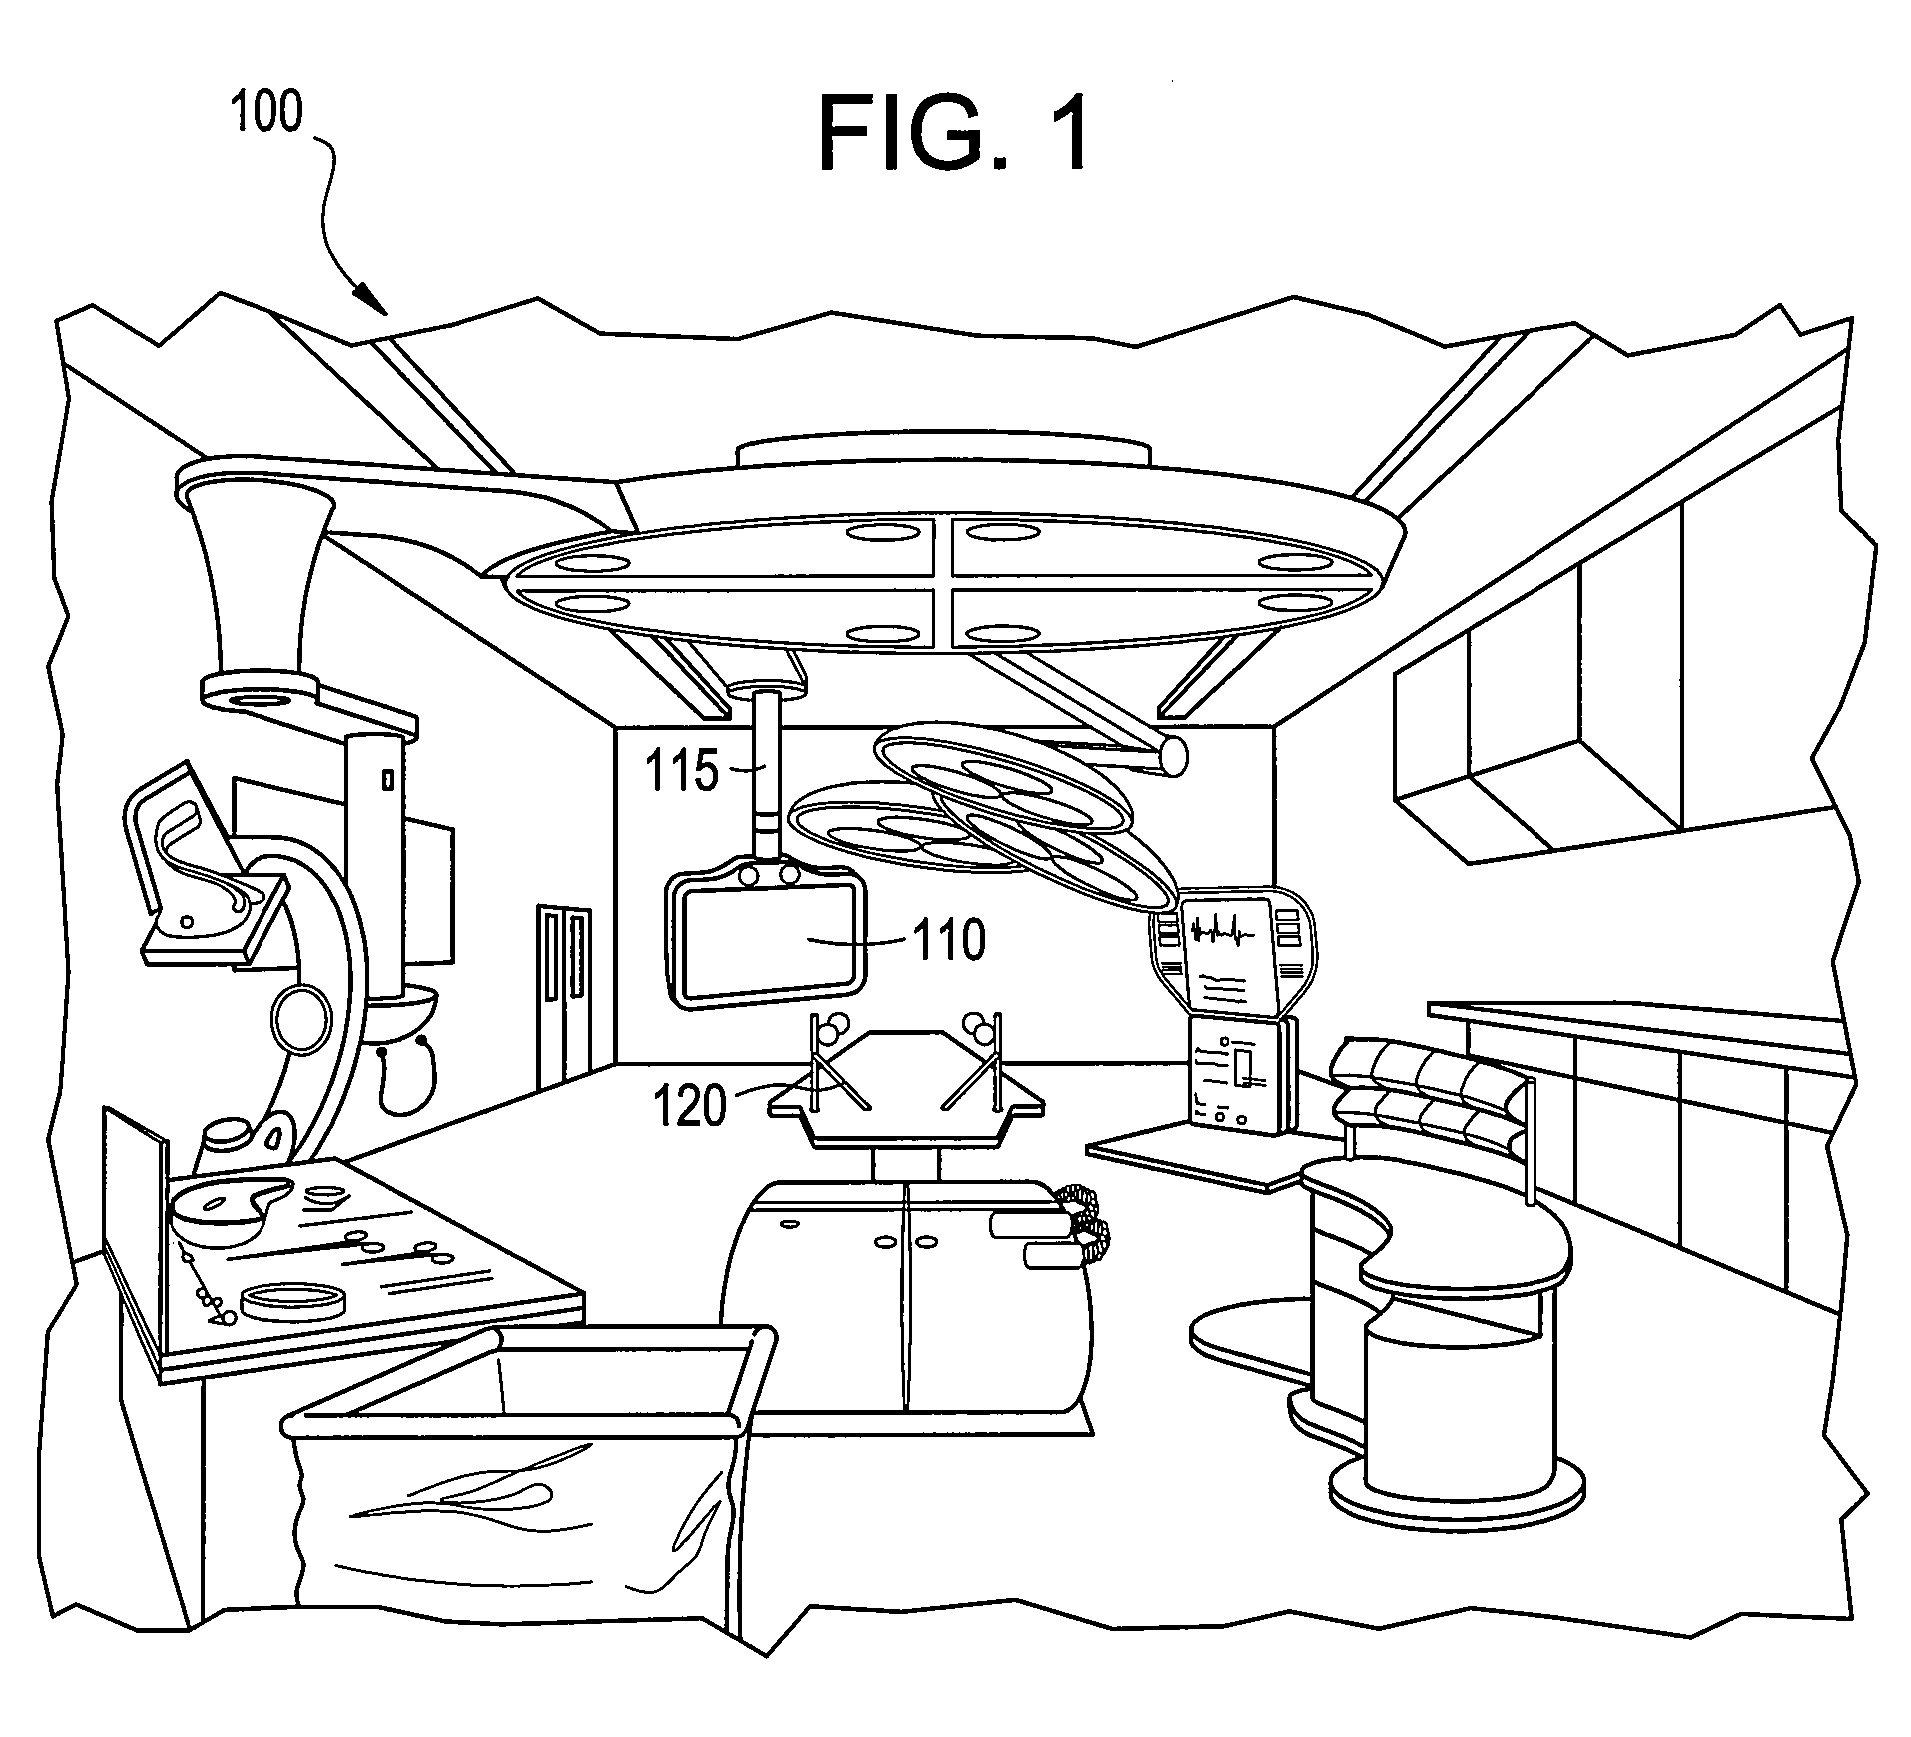 Method and apparatus for surgical operating room information display gaze detection and user prioritization for control